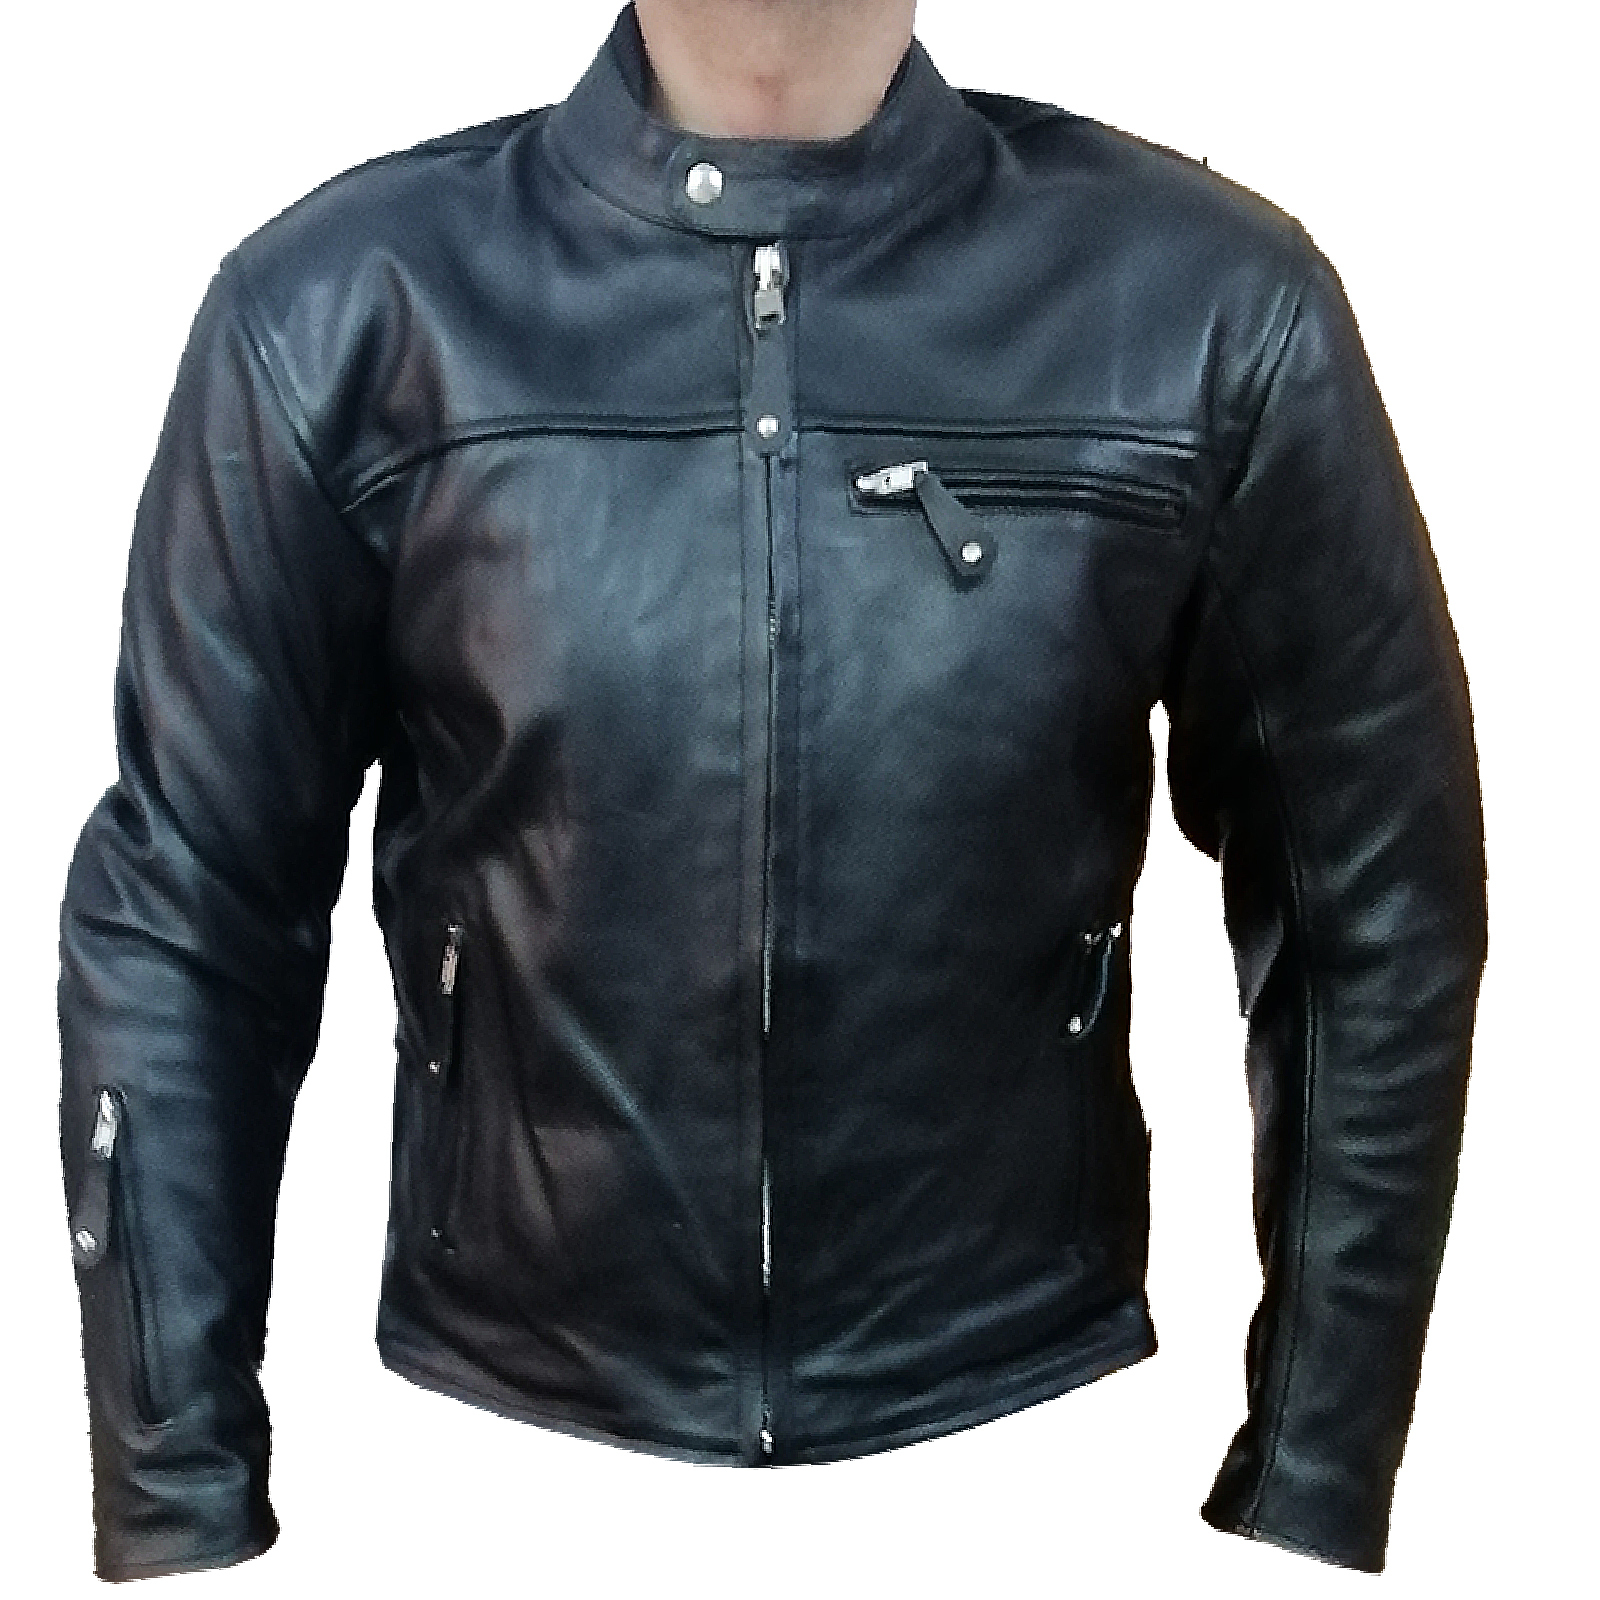 Primary image for Black Cowhide Leather Classic Motorcycle Style Jacket Biker Gear with Armor Pad